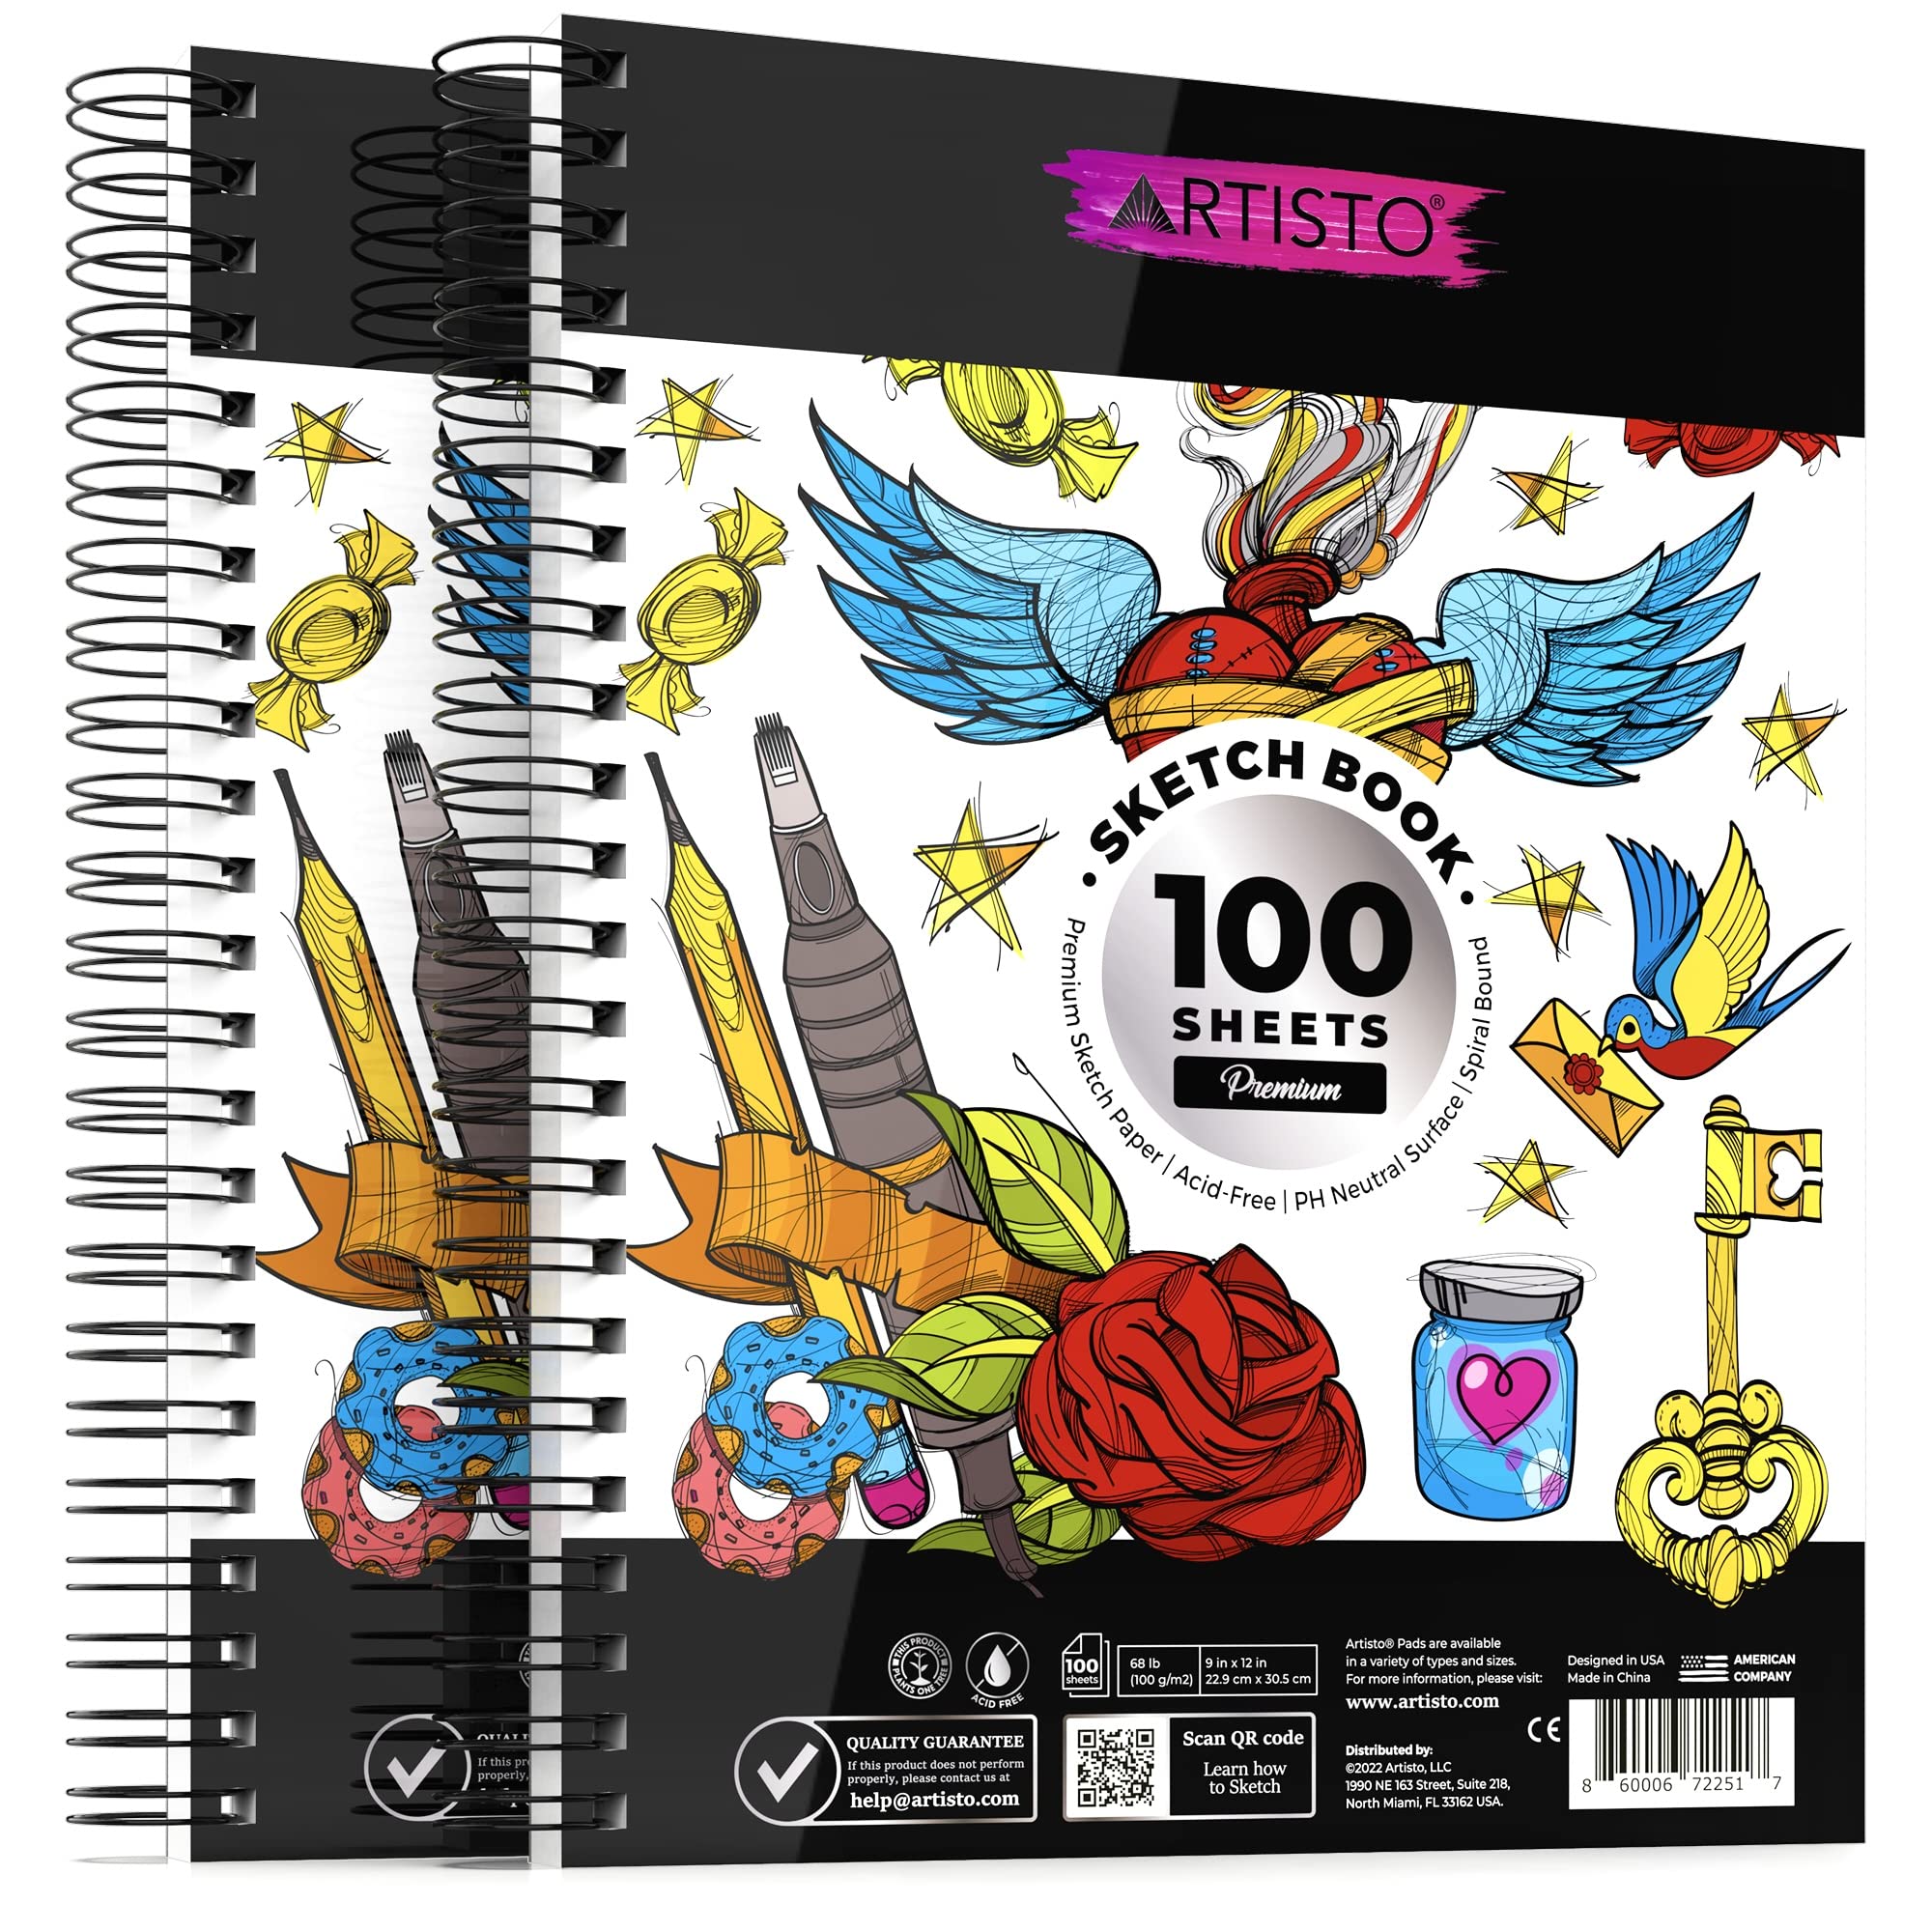 Artisto 5.5x8.5” Premium Sketch Book Set, Pack of 3 (300 Sheets), 68lb (100g/m2), Spiral Bound, Acid-Free Drawing Paper, Perfect for Most Dry Media